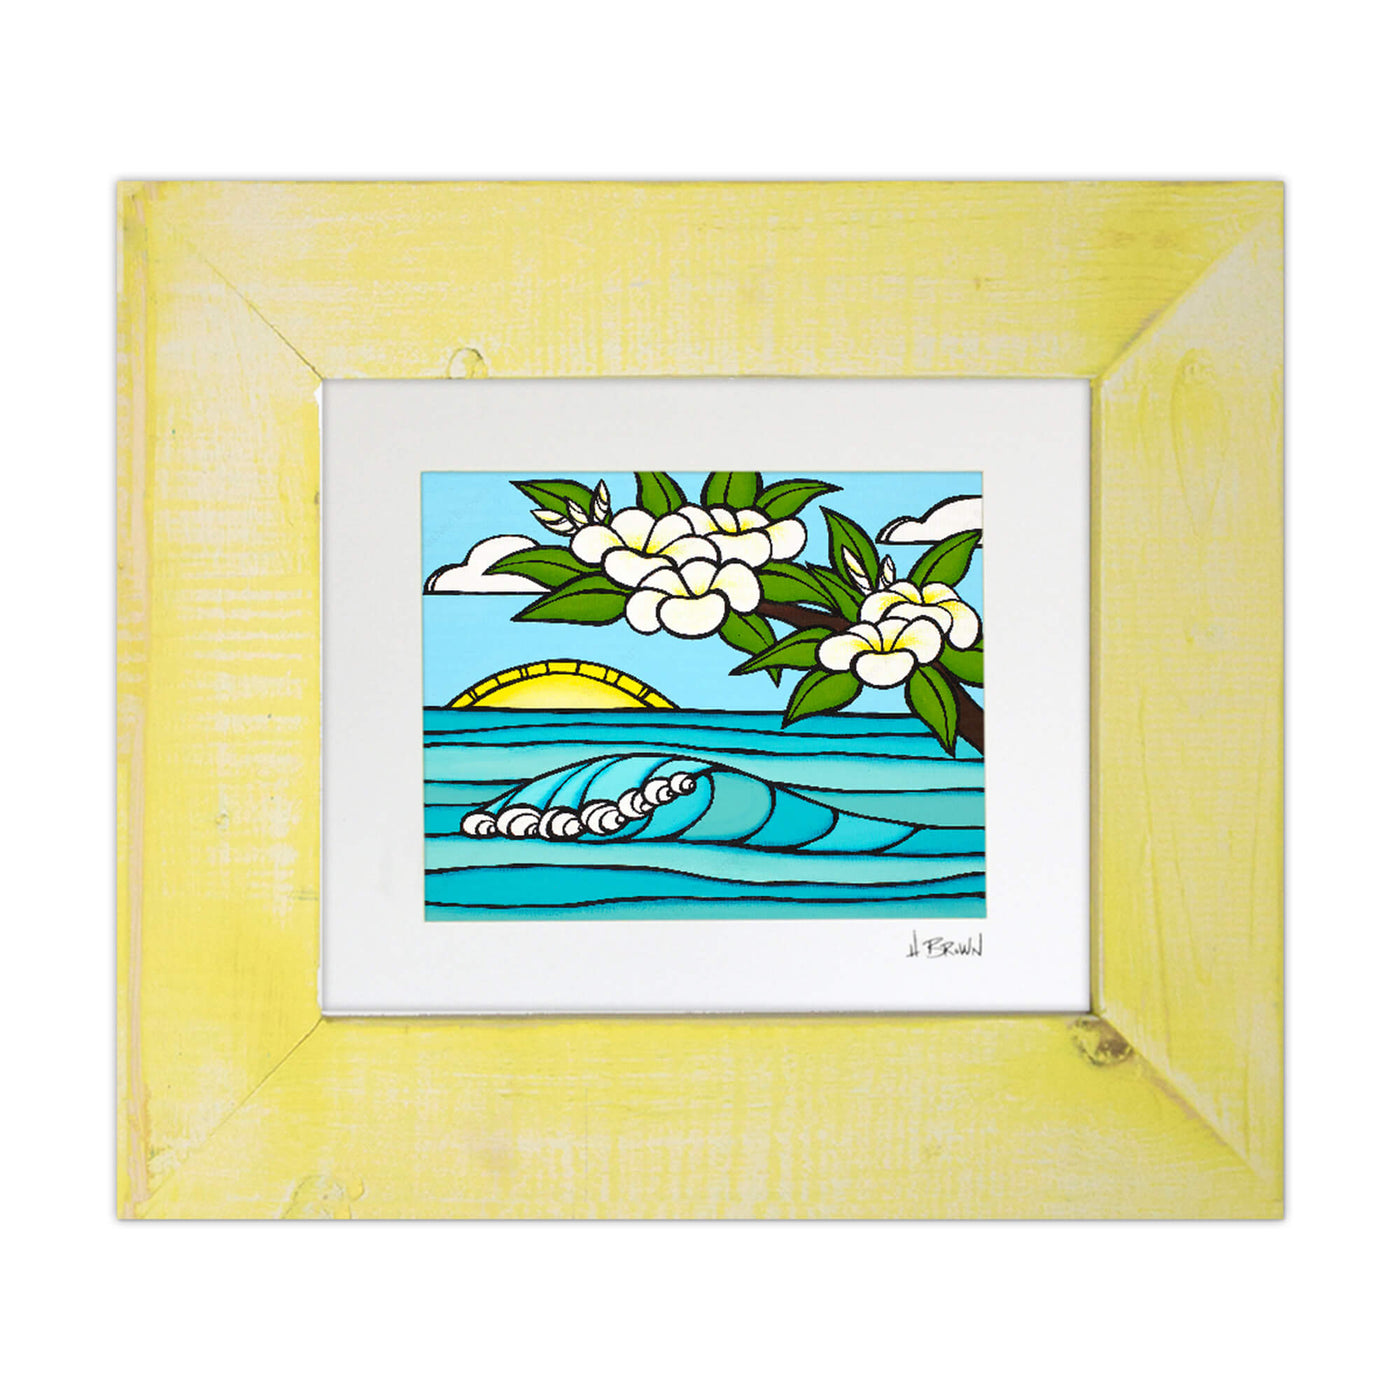 A matted art print in classic yellow frame of a sunrise with rolling waves and plumeria flowers by Hawaii surf artist Heather Brown